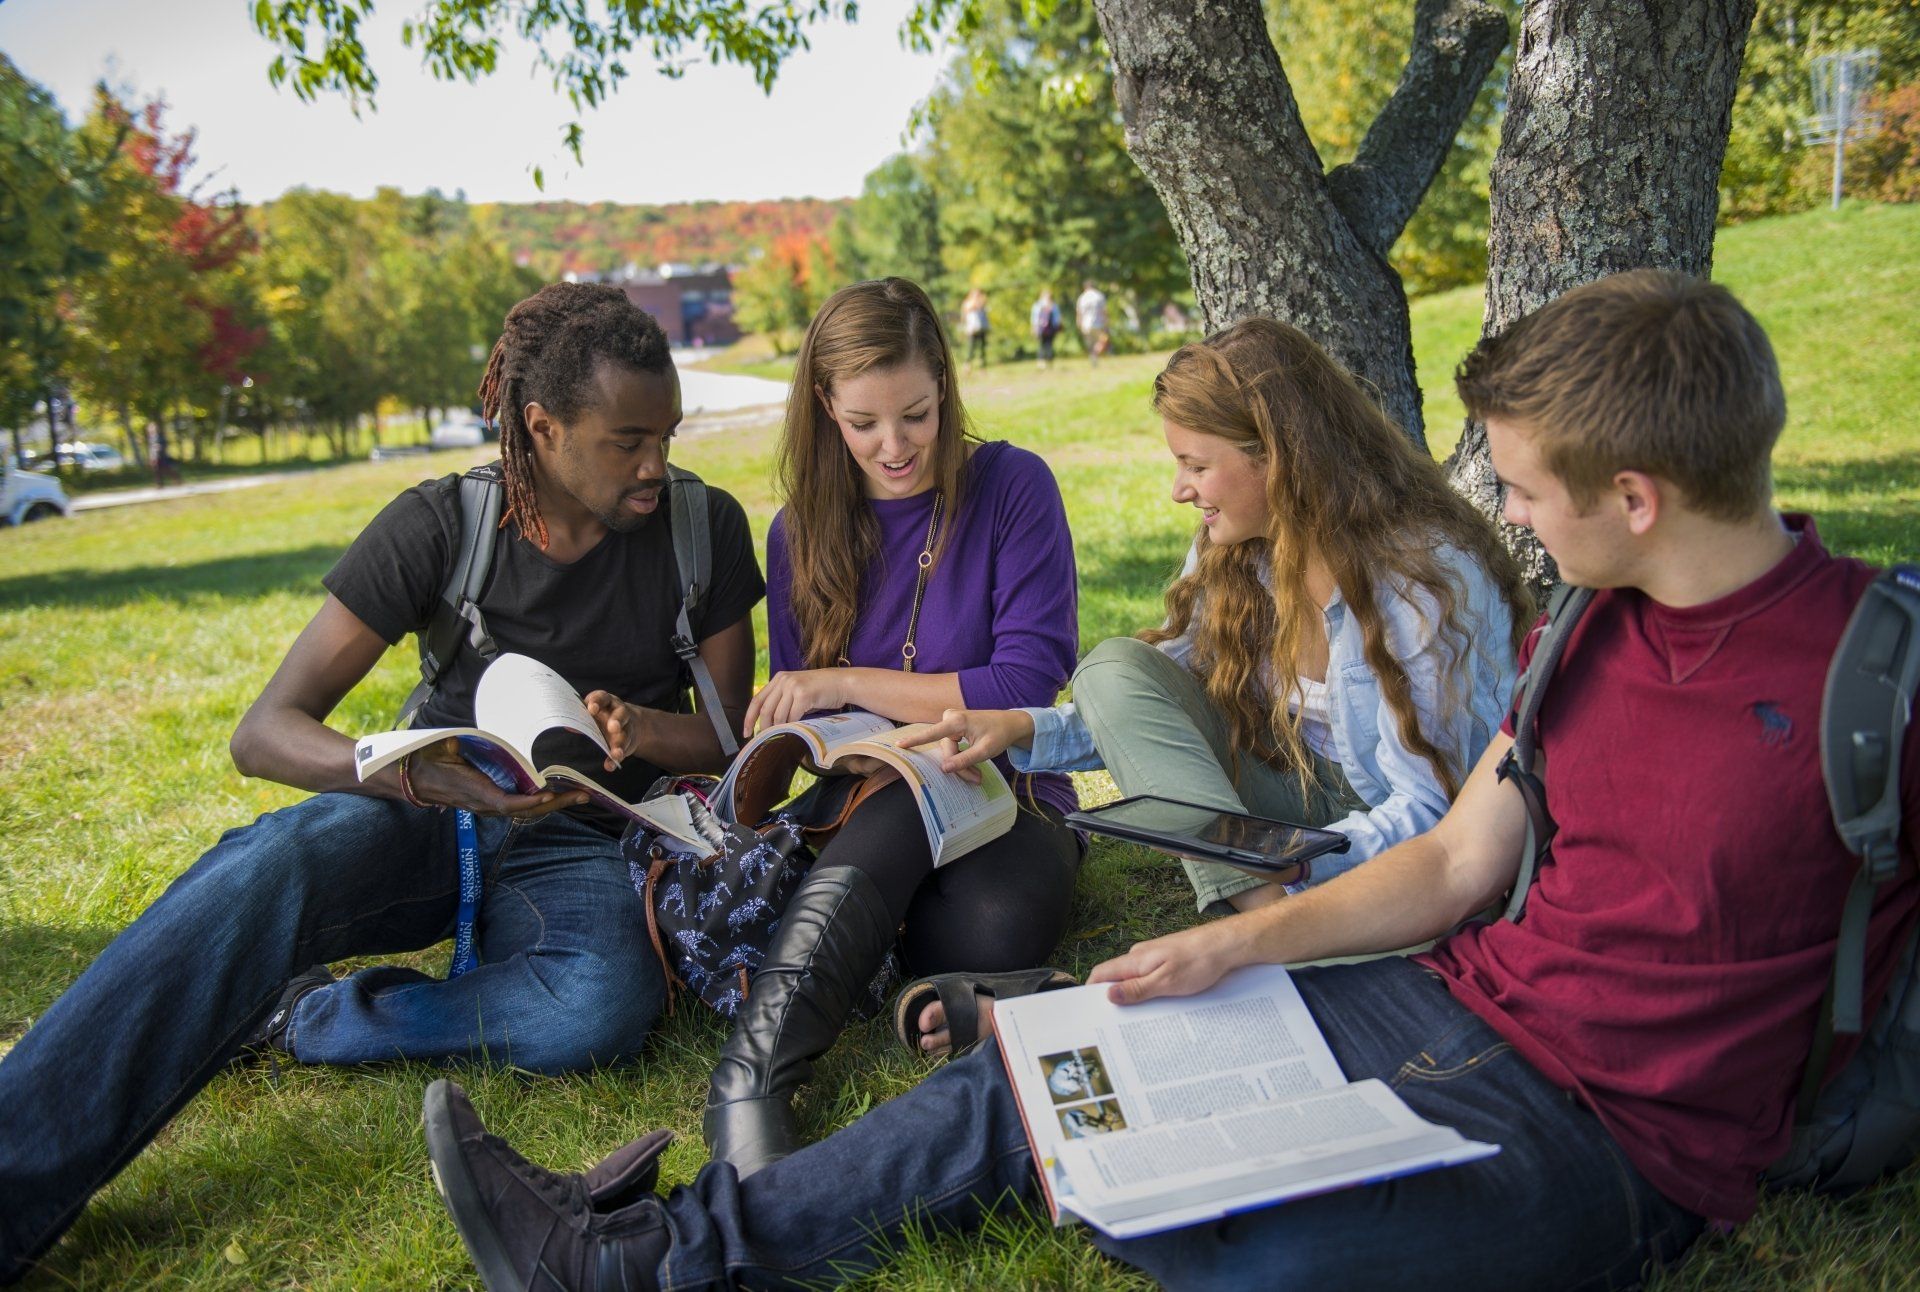 Students with open textbooks sitting beneath a tree on campus